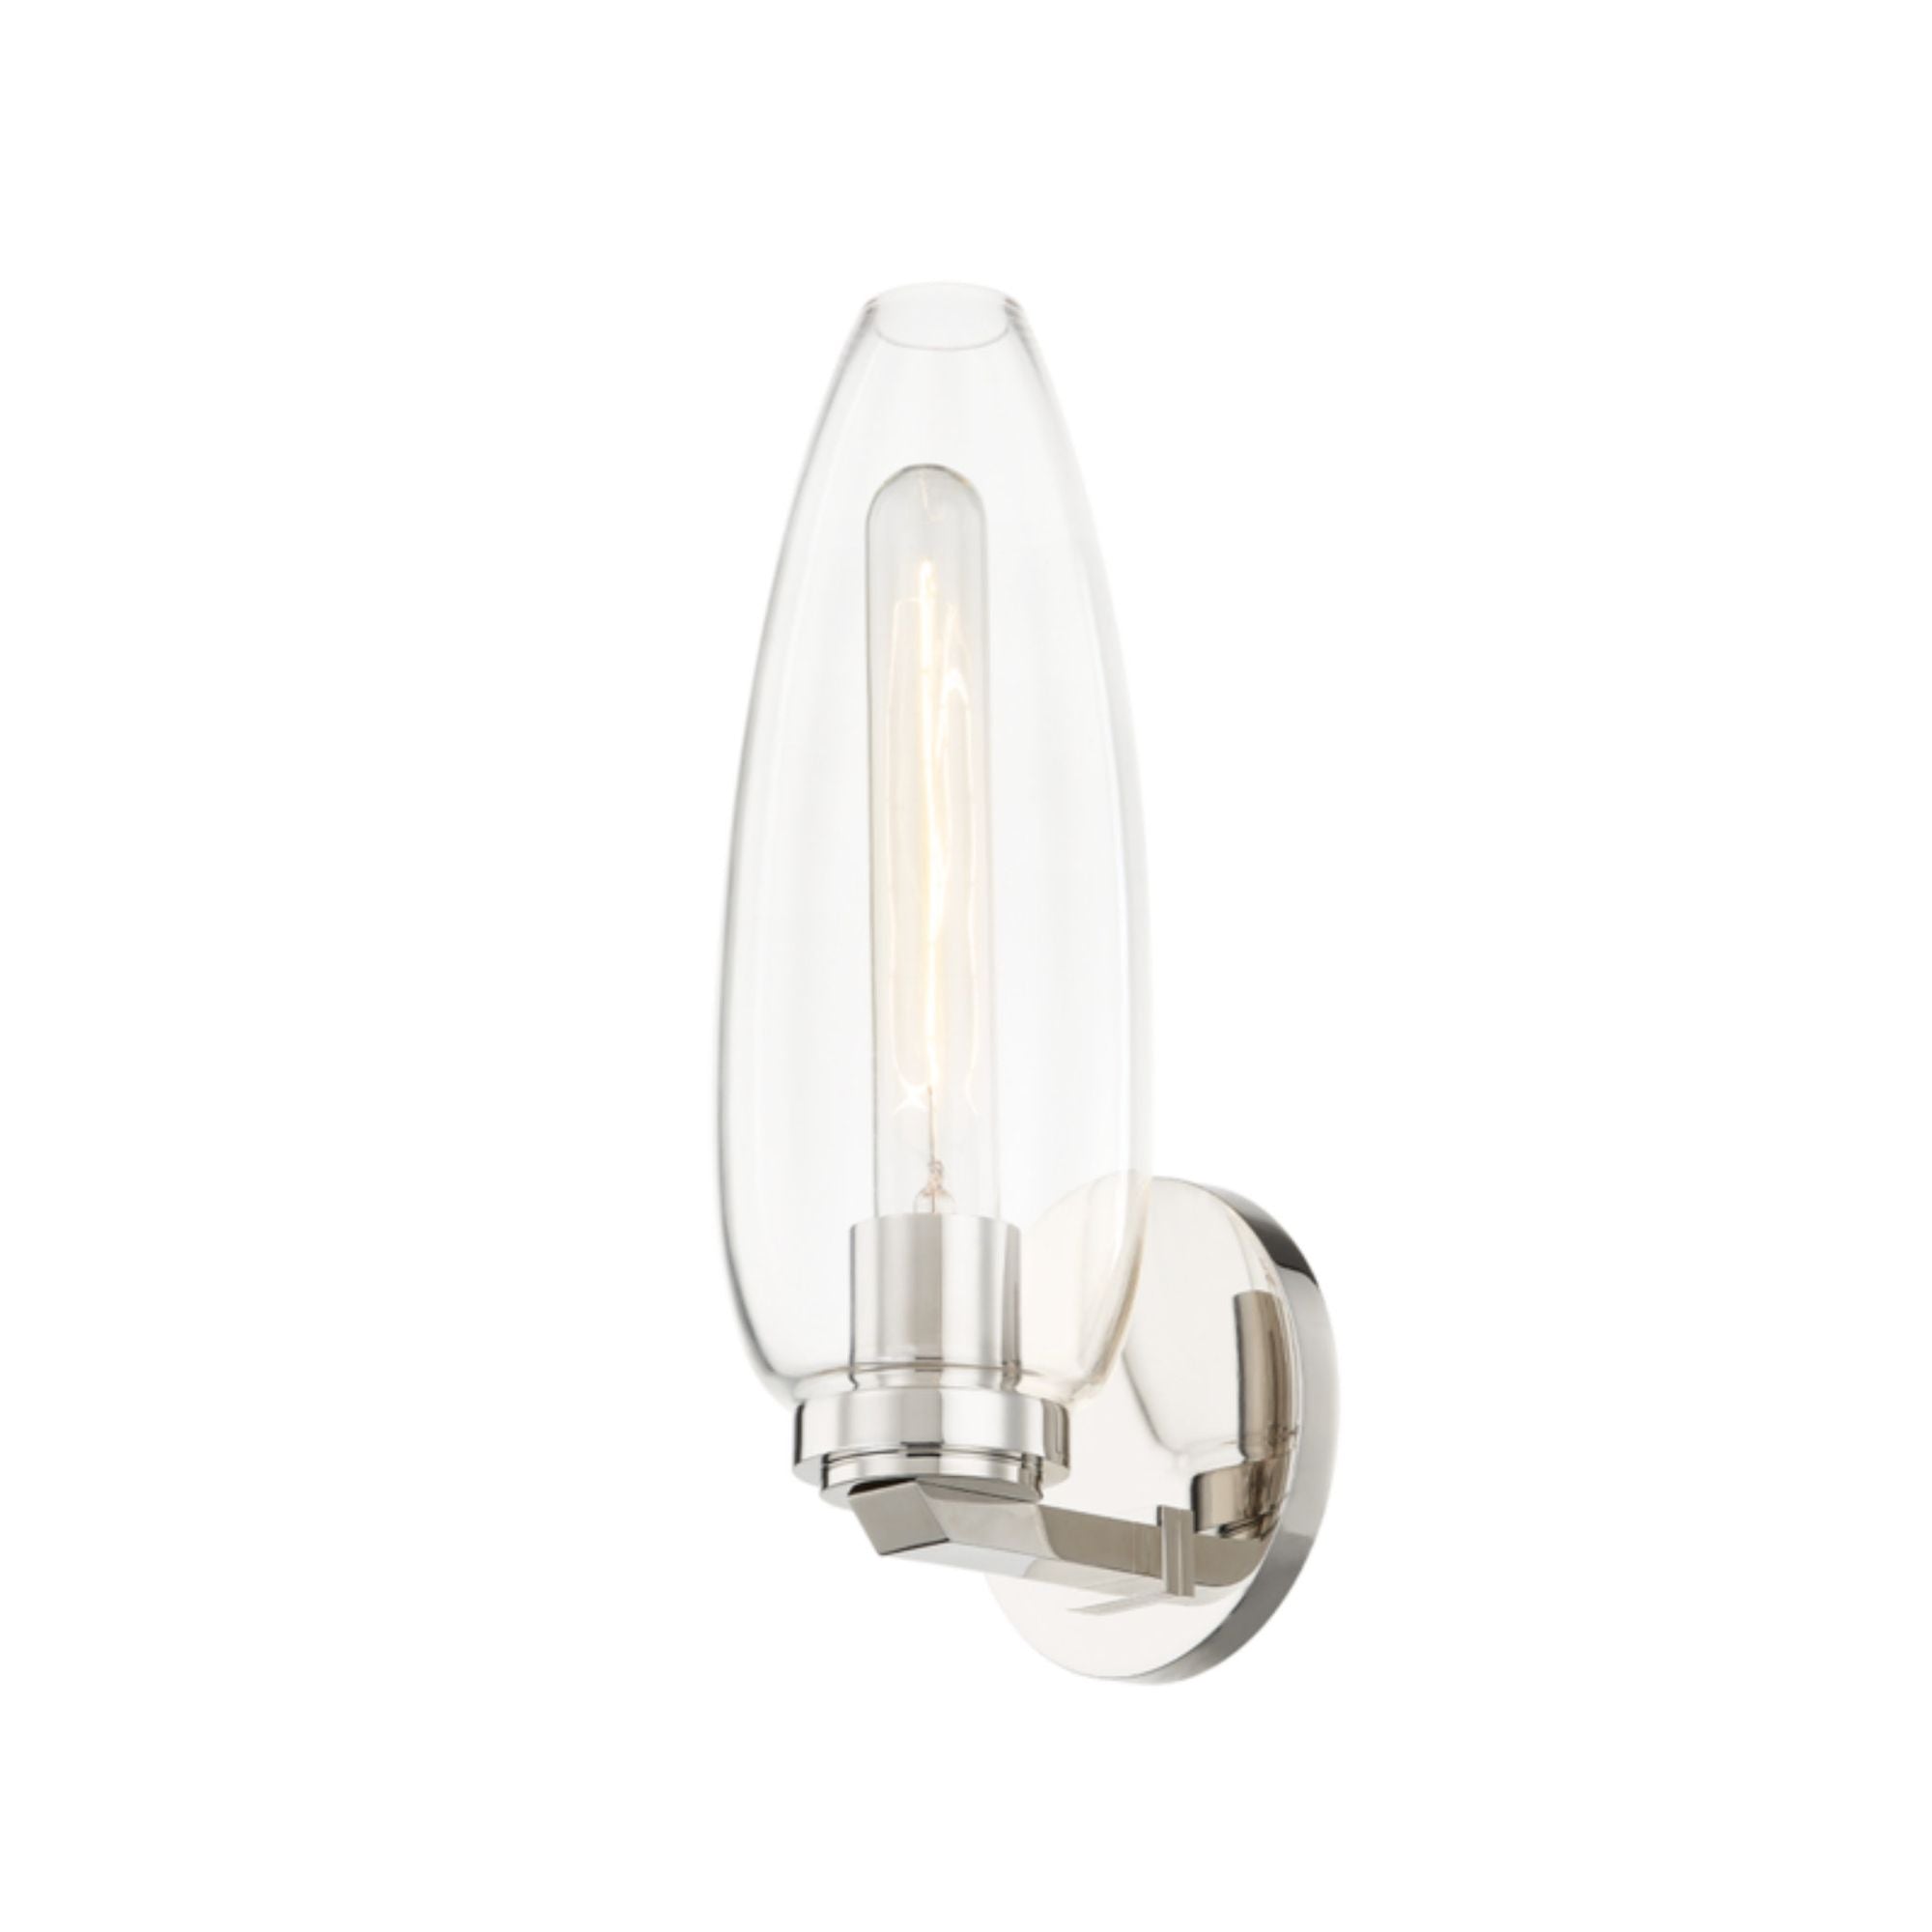 Fresno 1 Light Wall Sconce in Polished Nickel